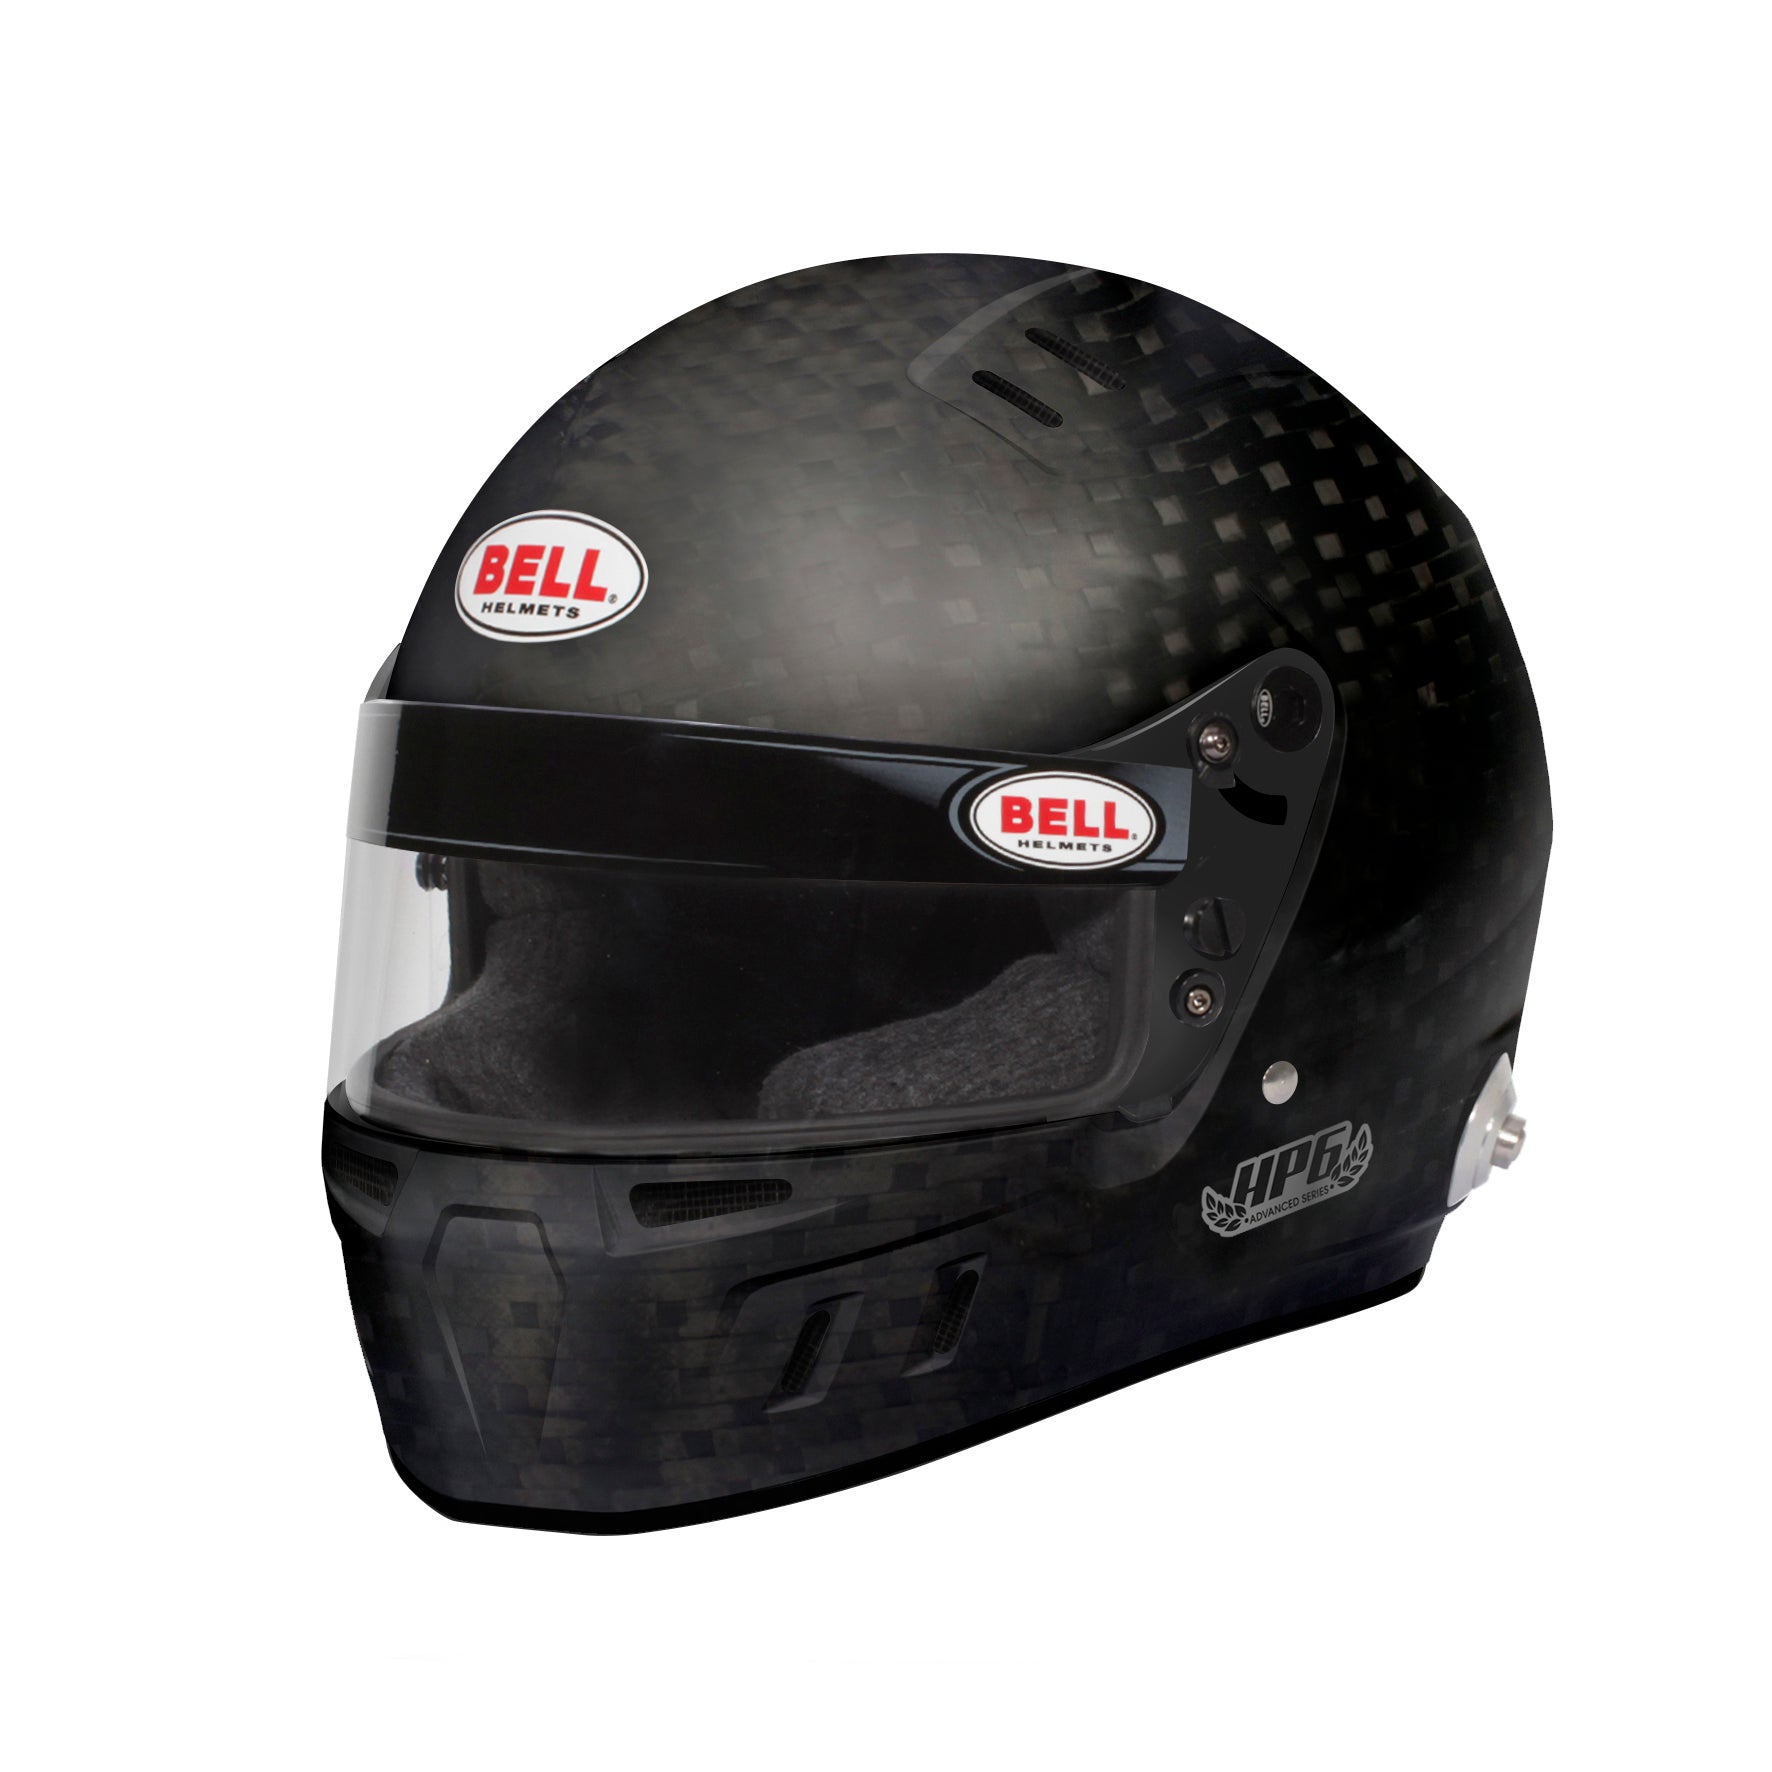 BELL 1140004 HP6 Racing helmet full-face, HANS, FIA8860-2018, carbon, size 57 (7 1/8) Photo-0 